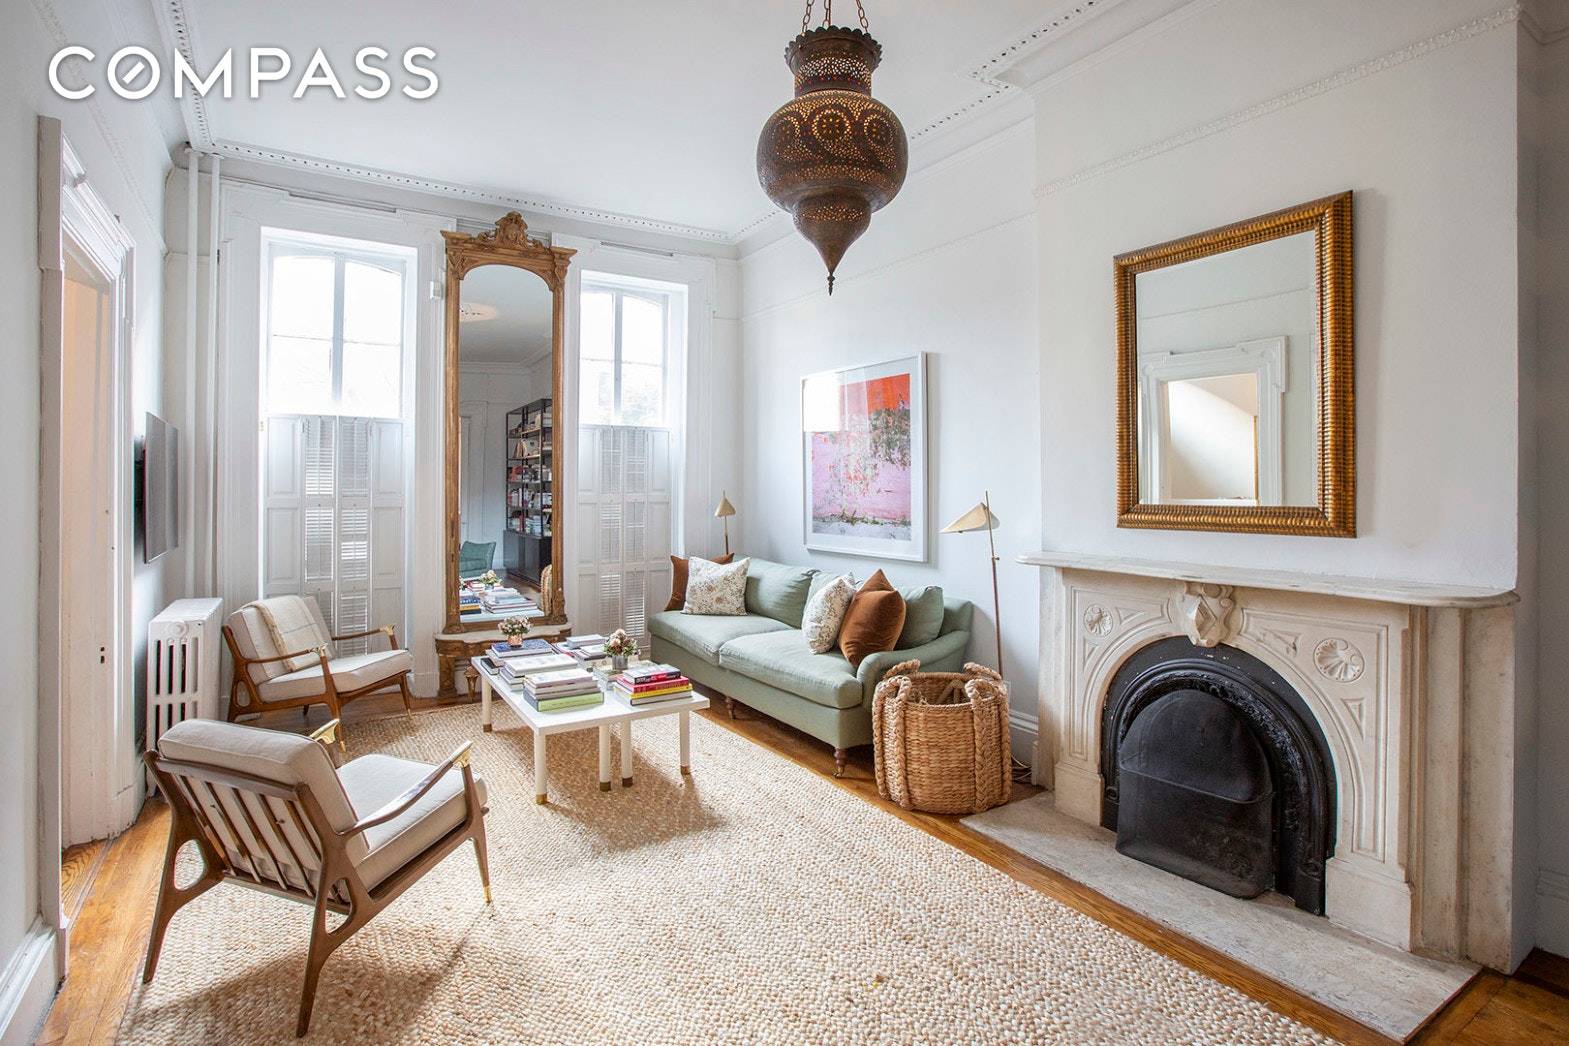 Available Immediately Beautiful Brooklyn Heights townhouse loaded with original charming details like crown moulding and marble fireplaces.